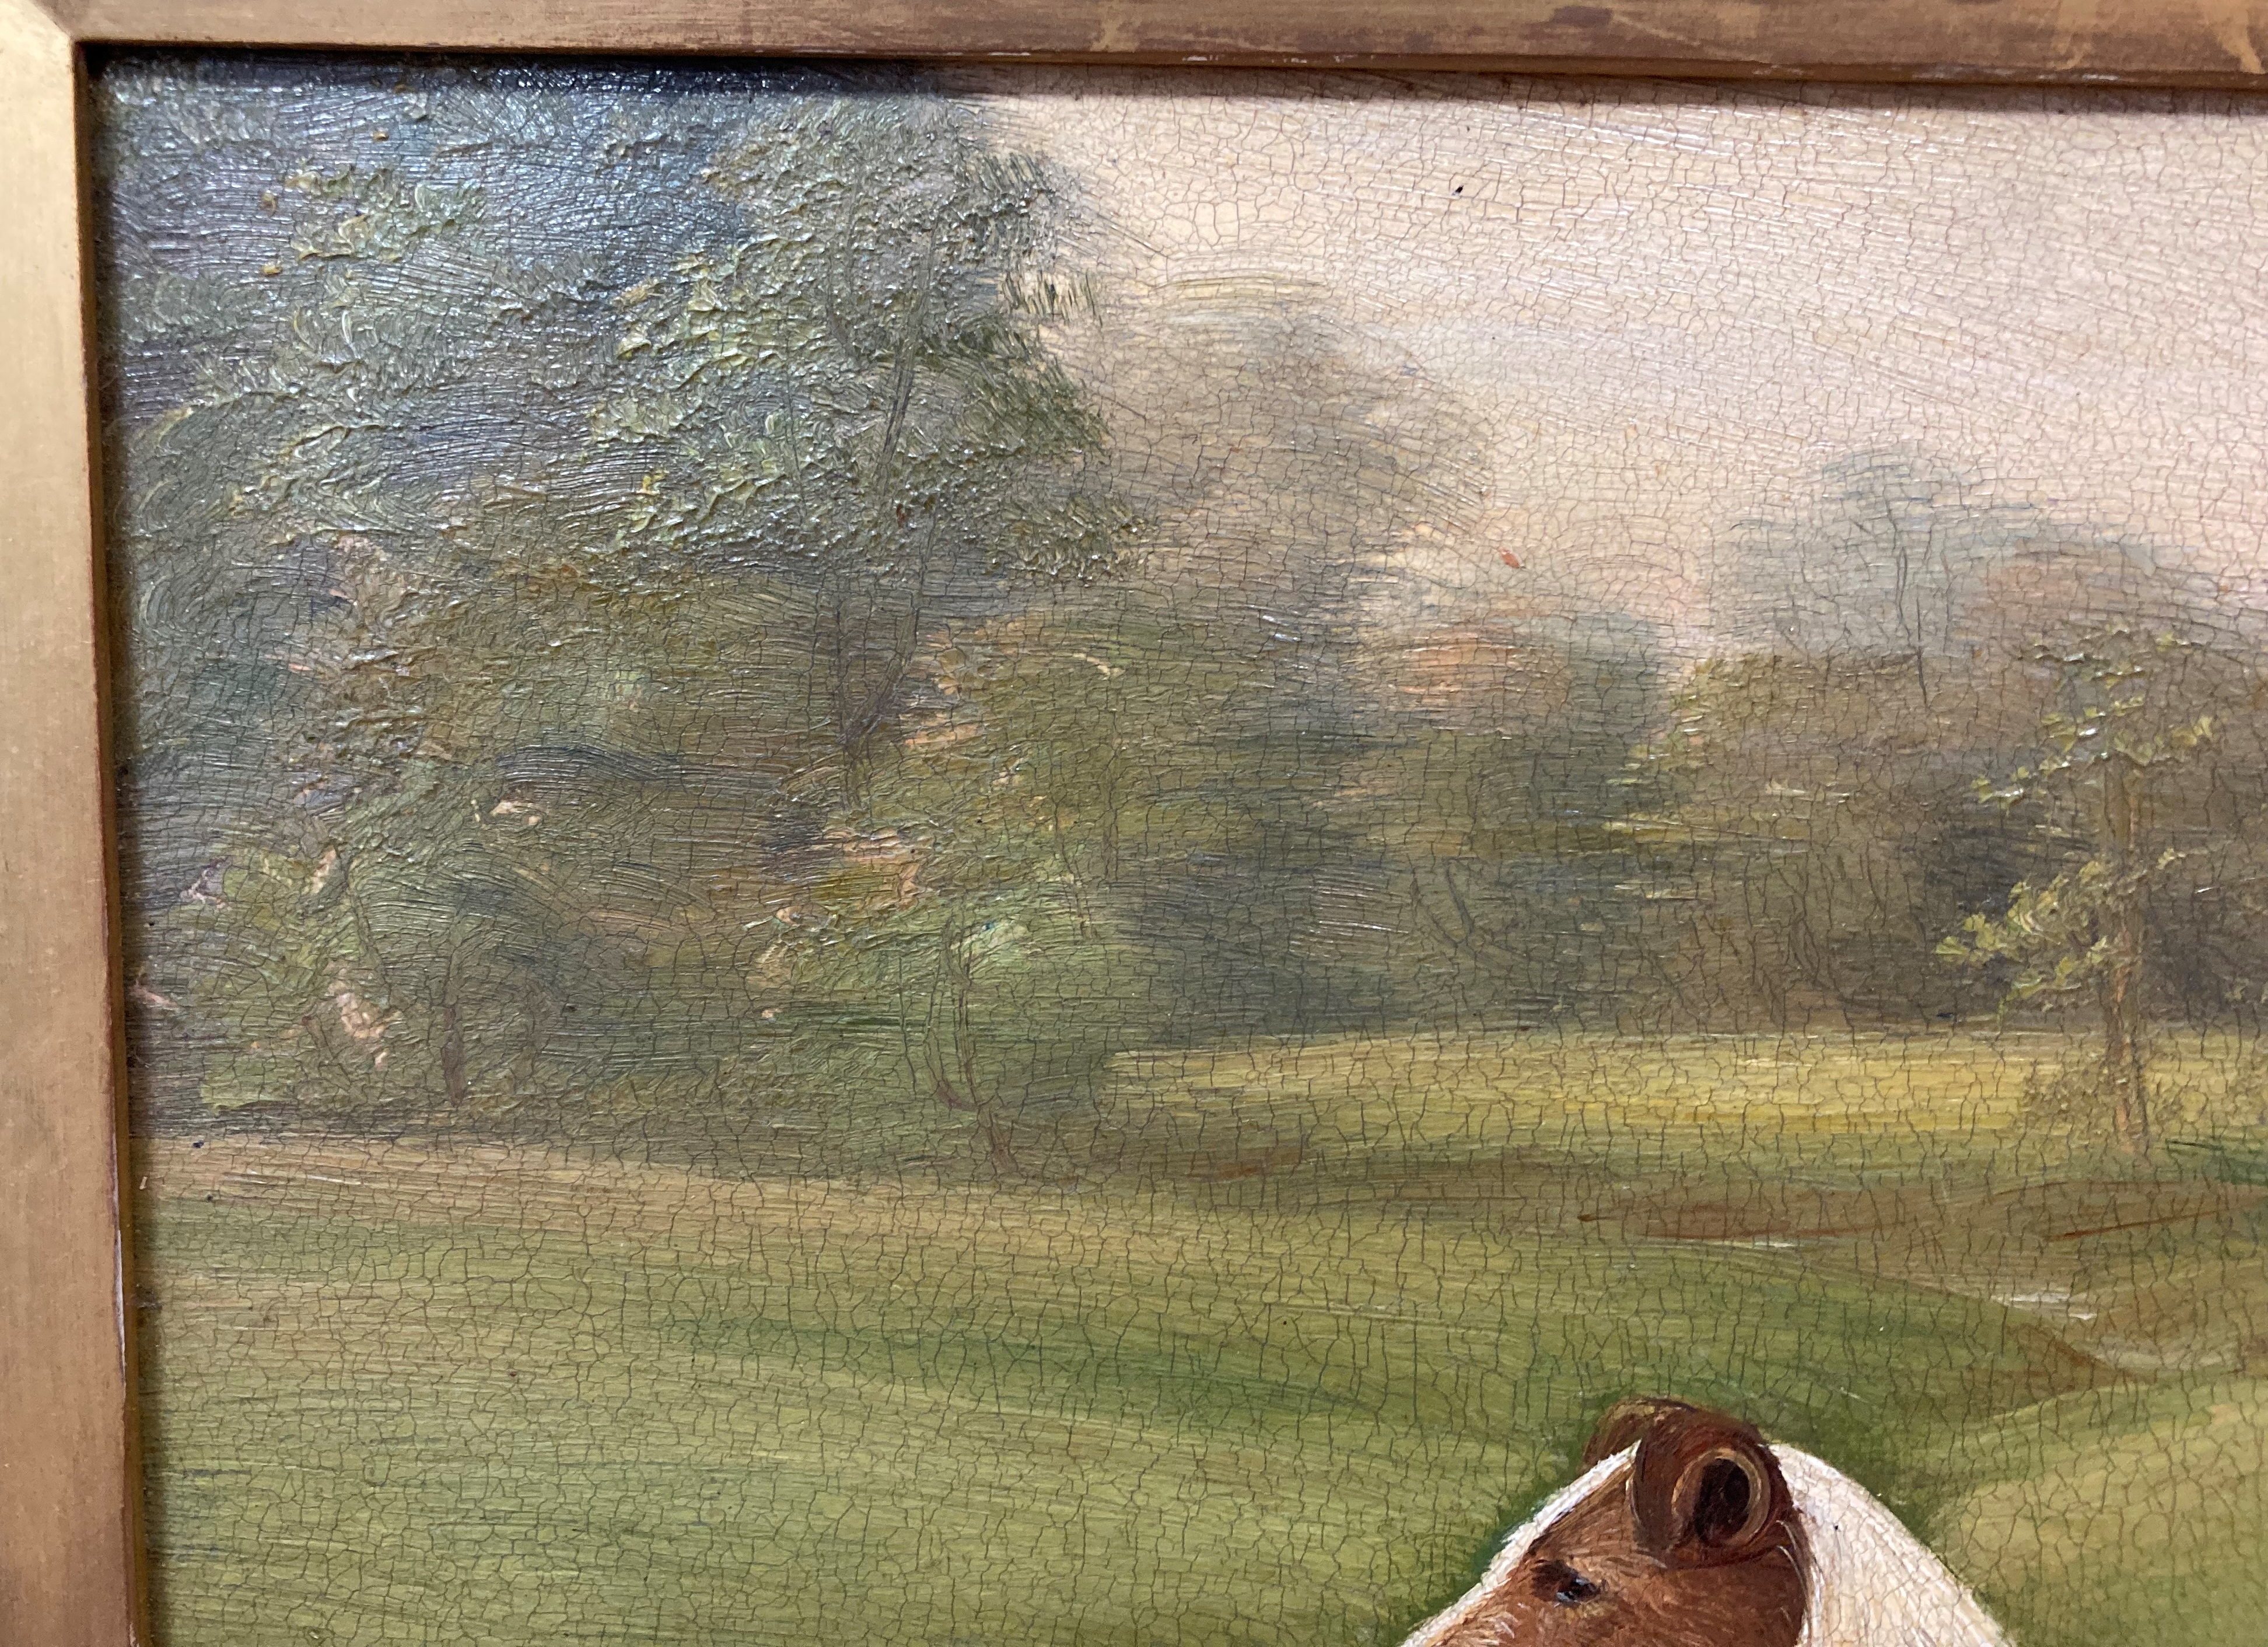 H Crowther 1923, 'Stapenhill Wiregirls Legacy', study of a fox terrier, oil on canvas, - Image 13 of 32